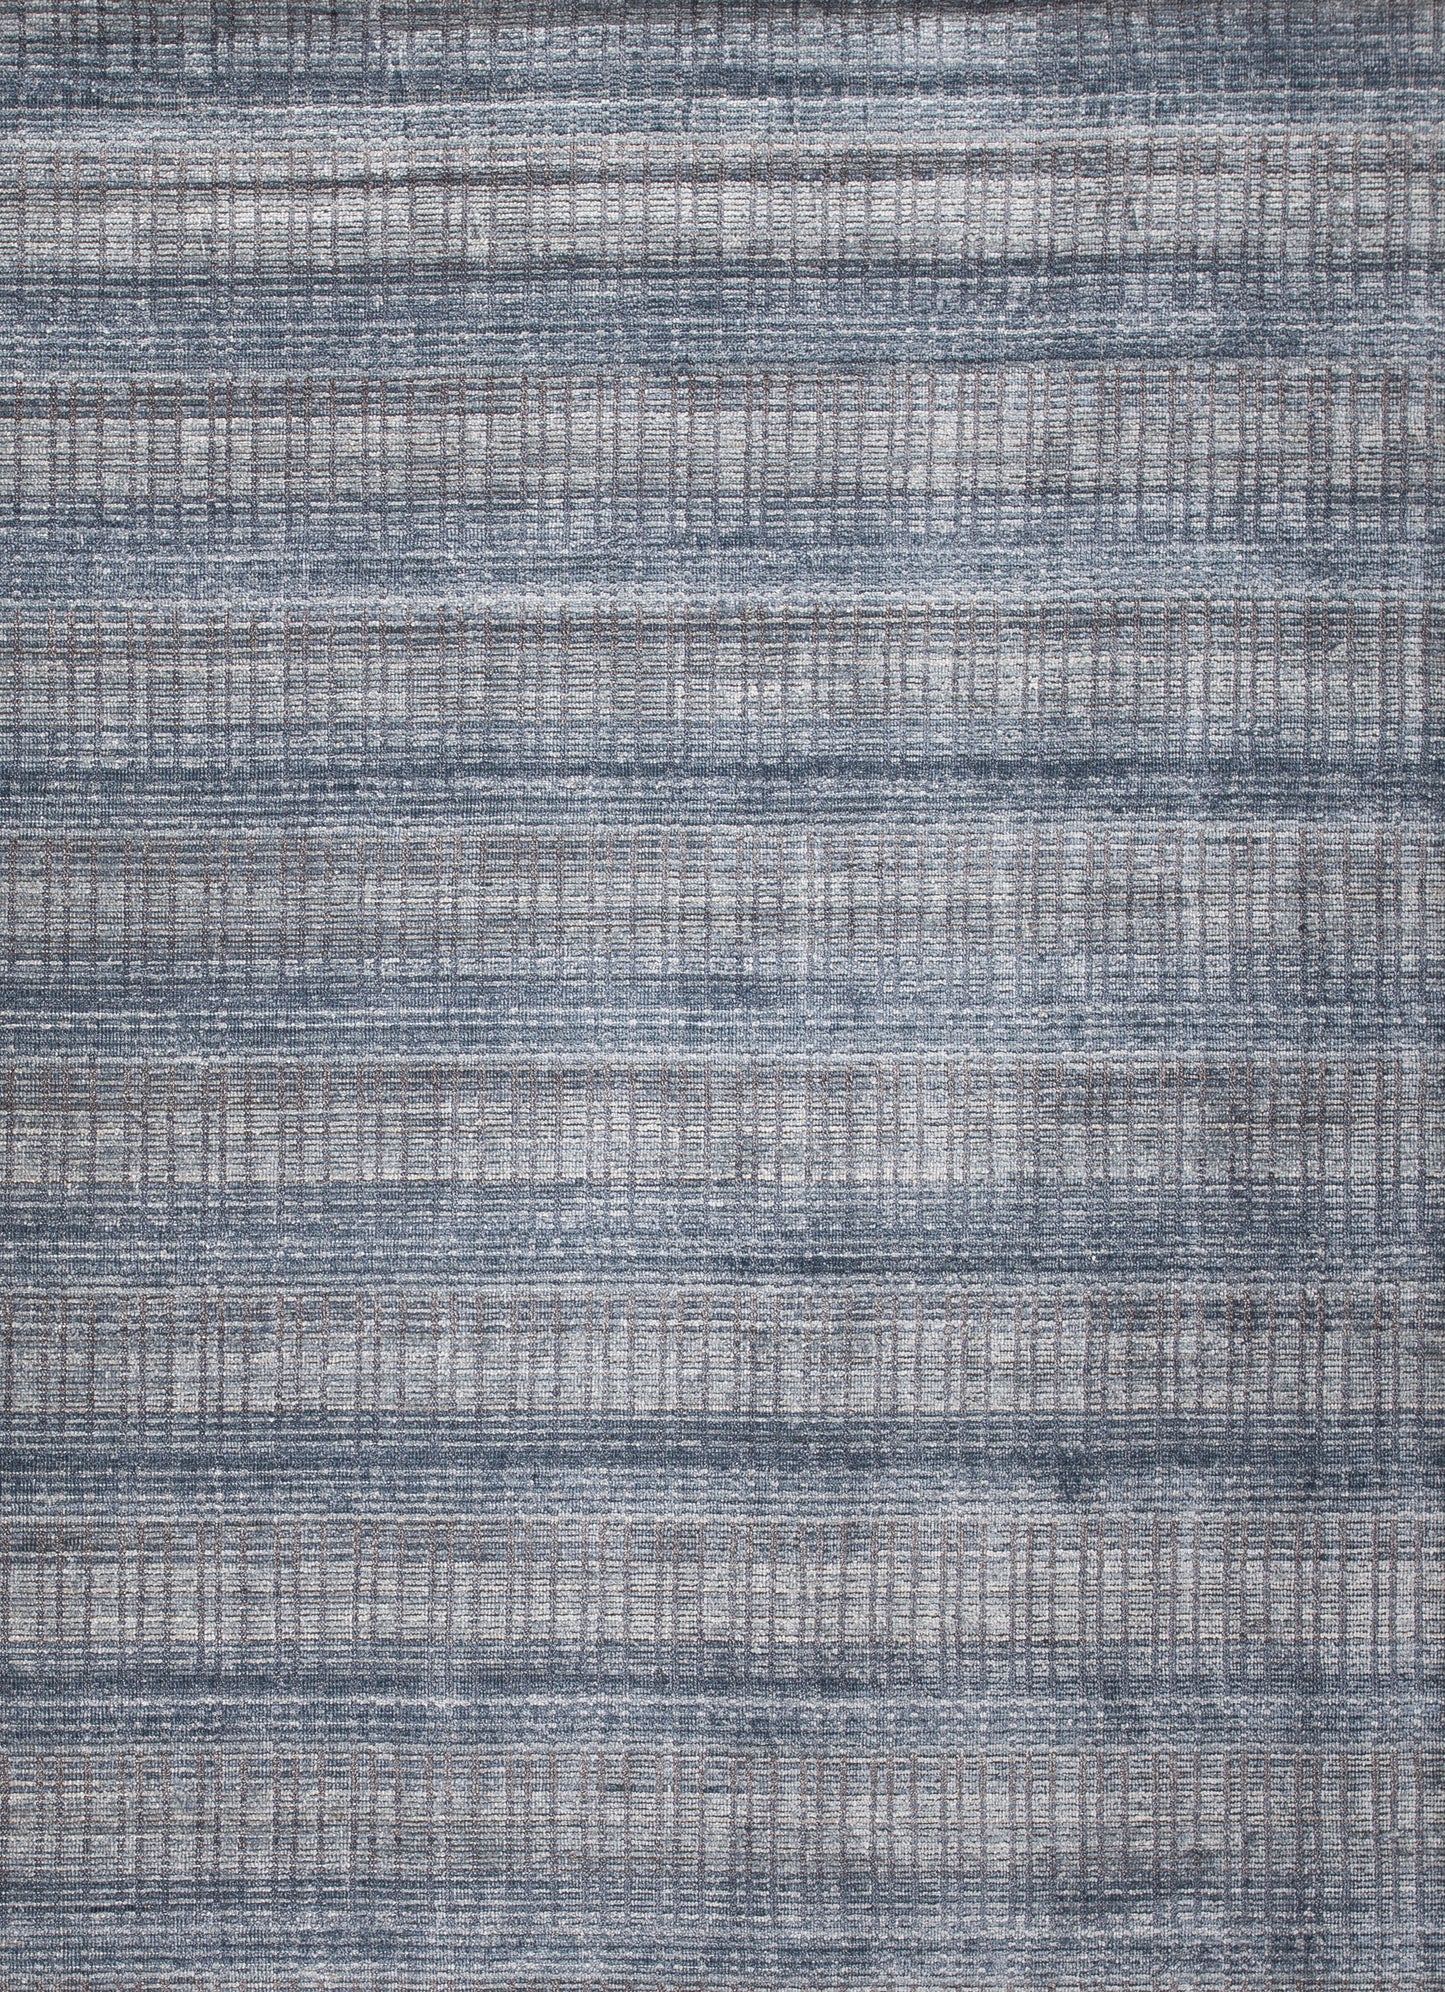 the pattern shows rows composed by small vertical lines on light gray background and a navy blue distressed line as a separation from each other.